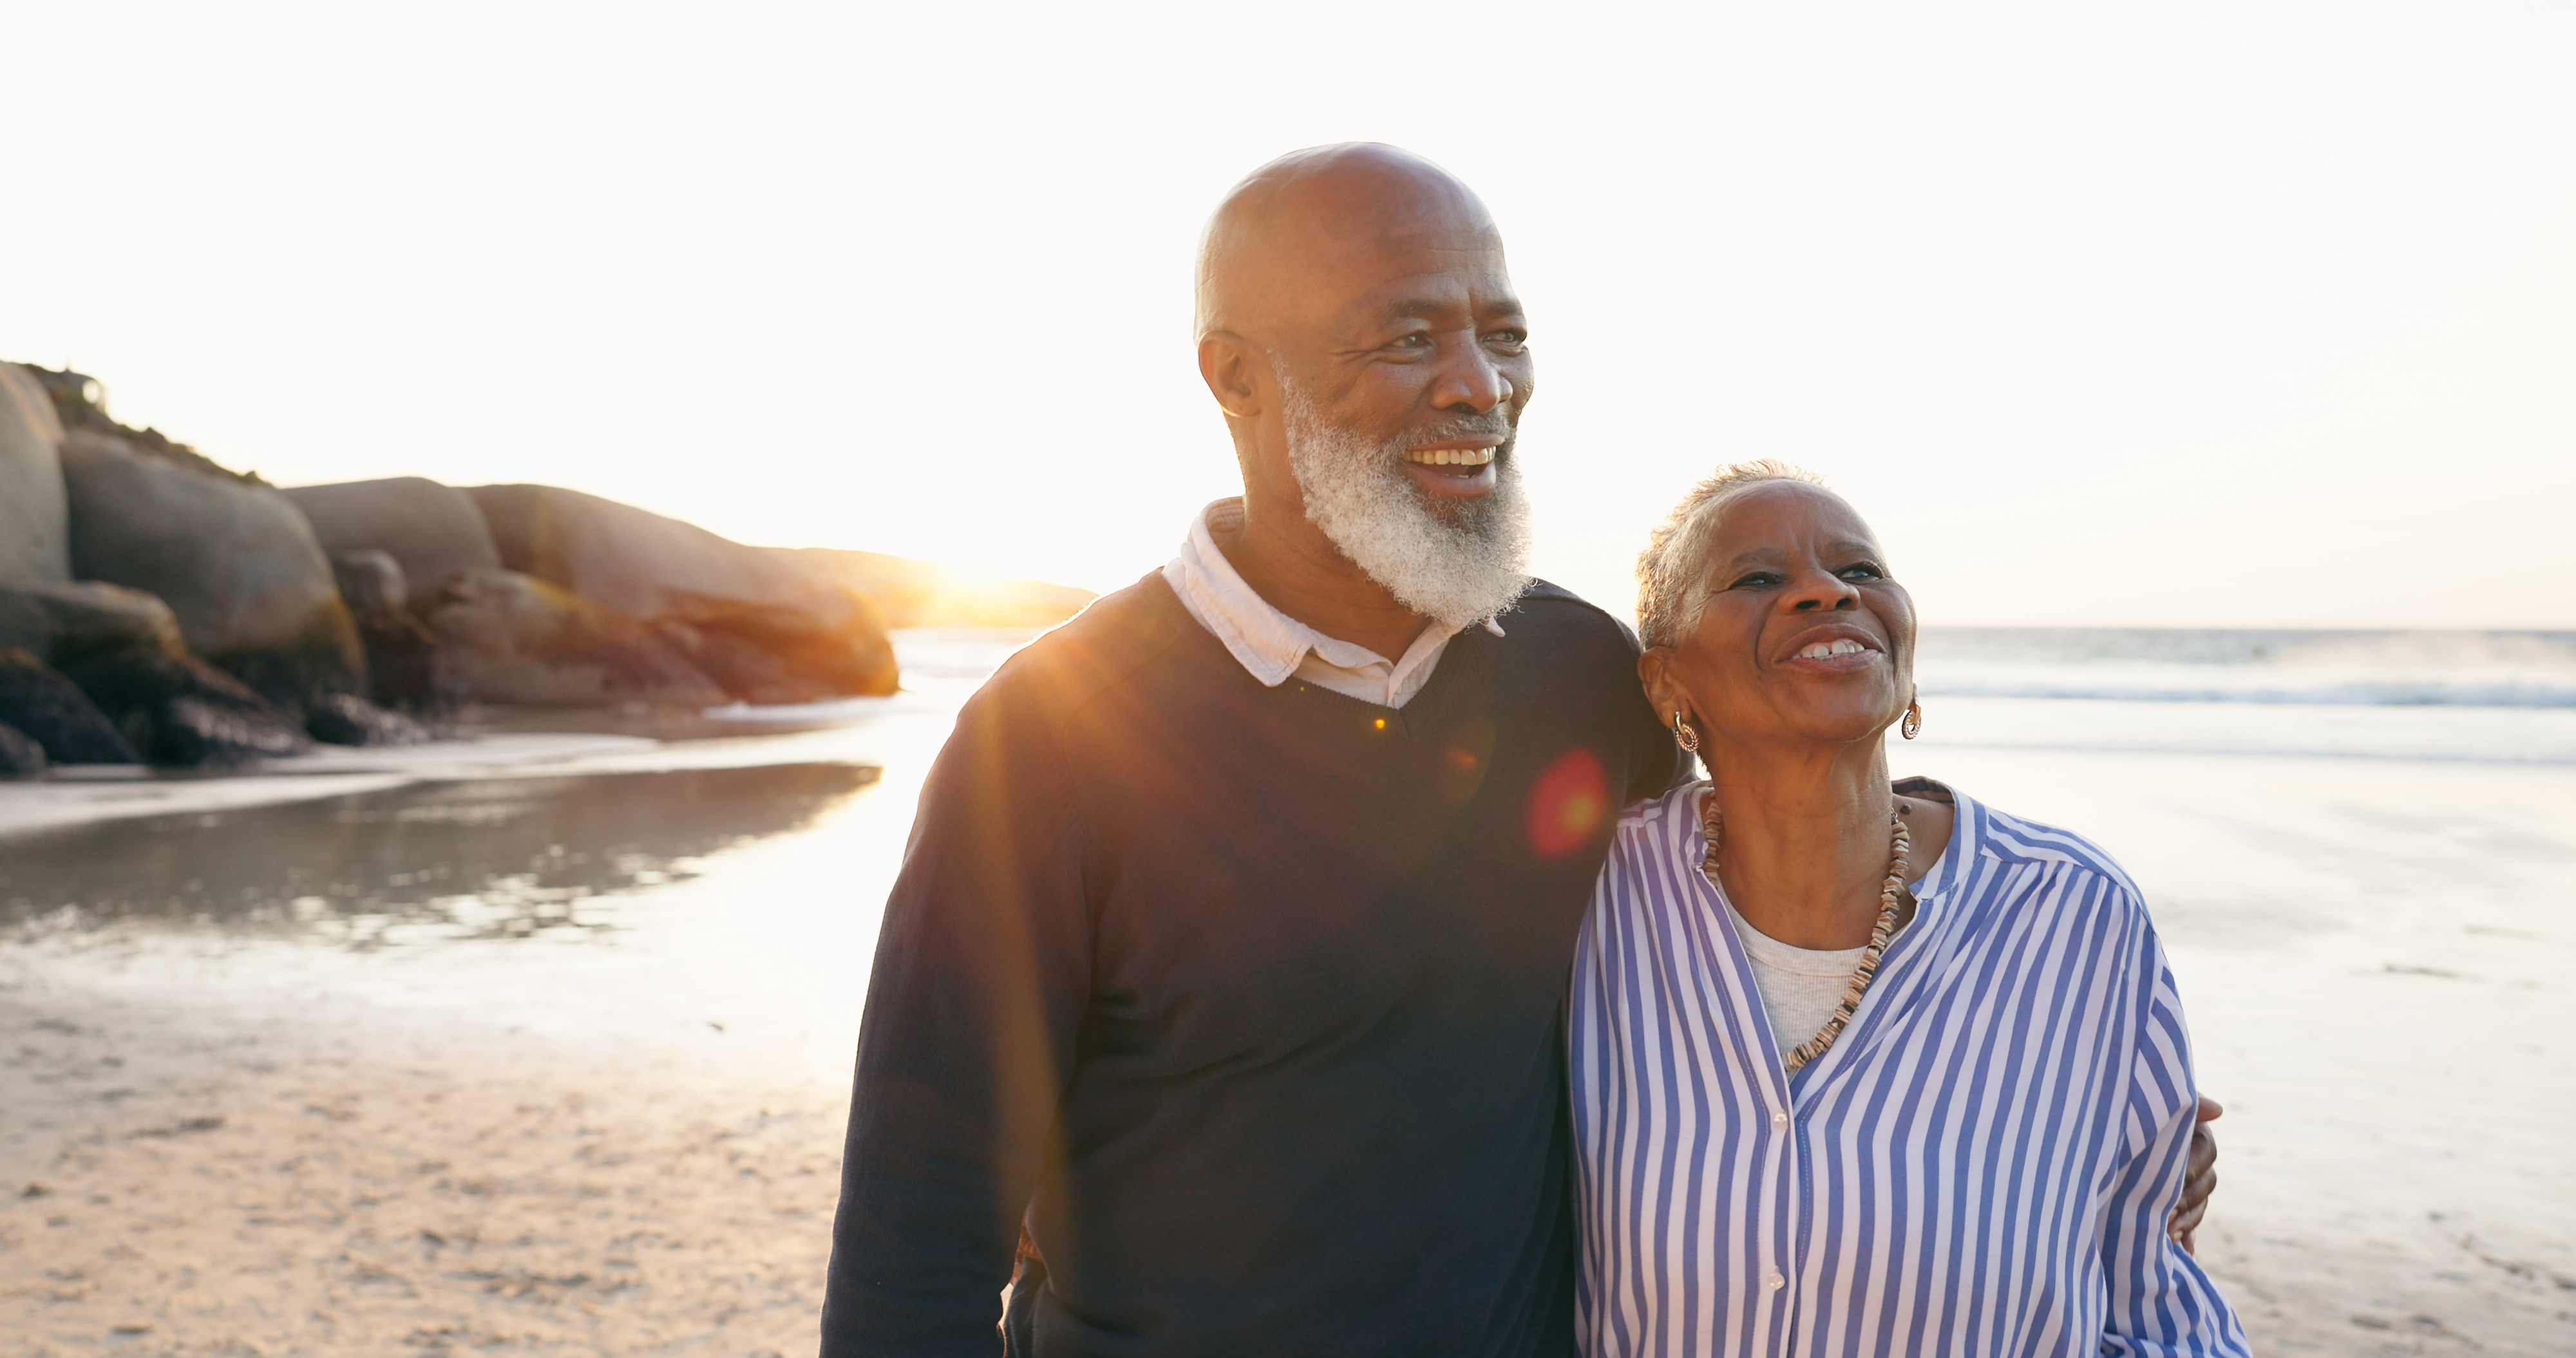 Two older adults smiling and holding each other on a beach at sunset, conveying a romantic mood